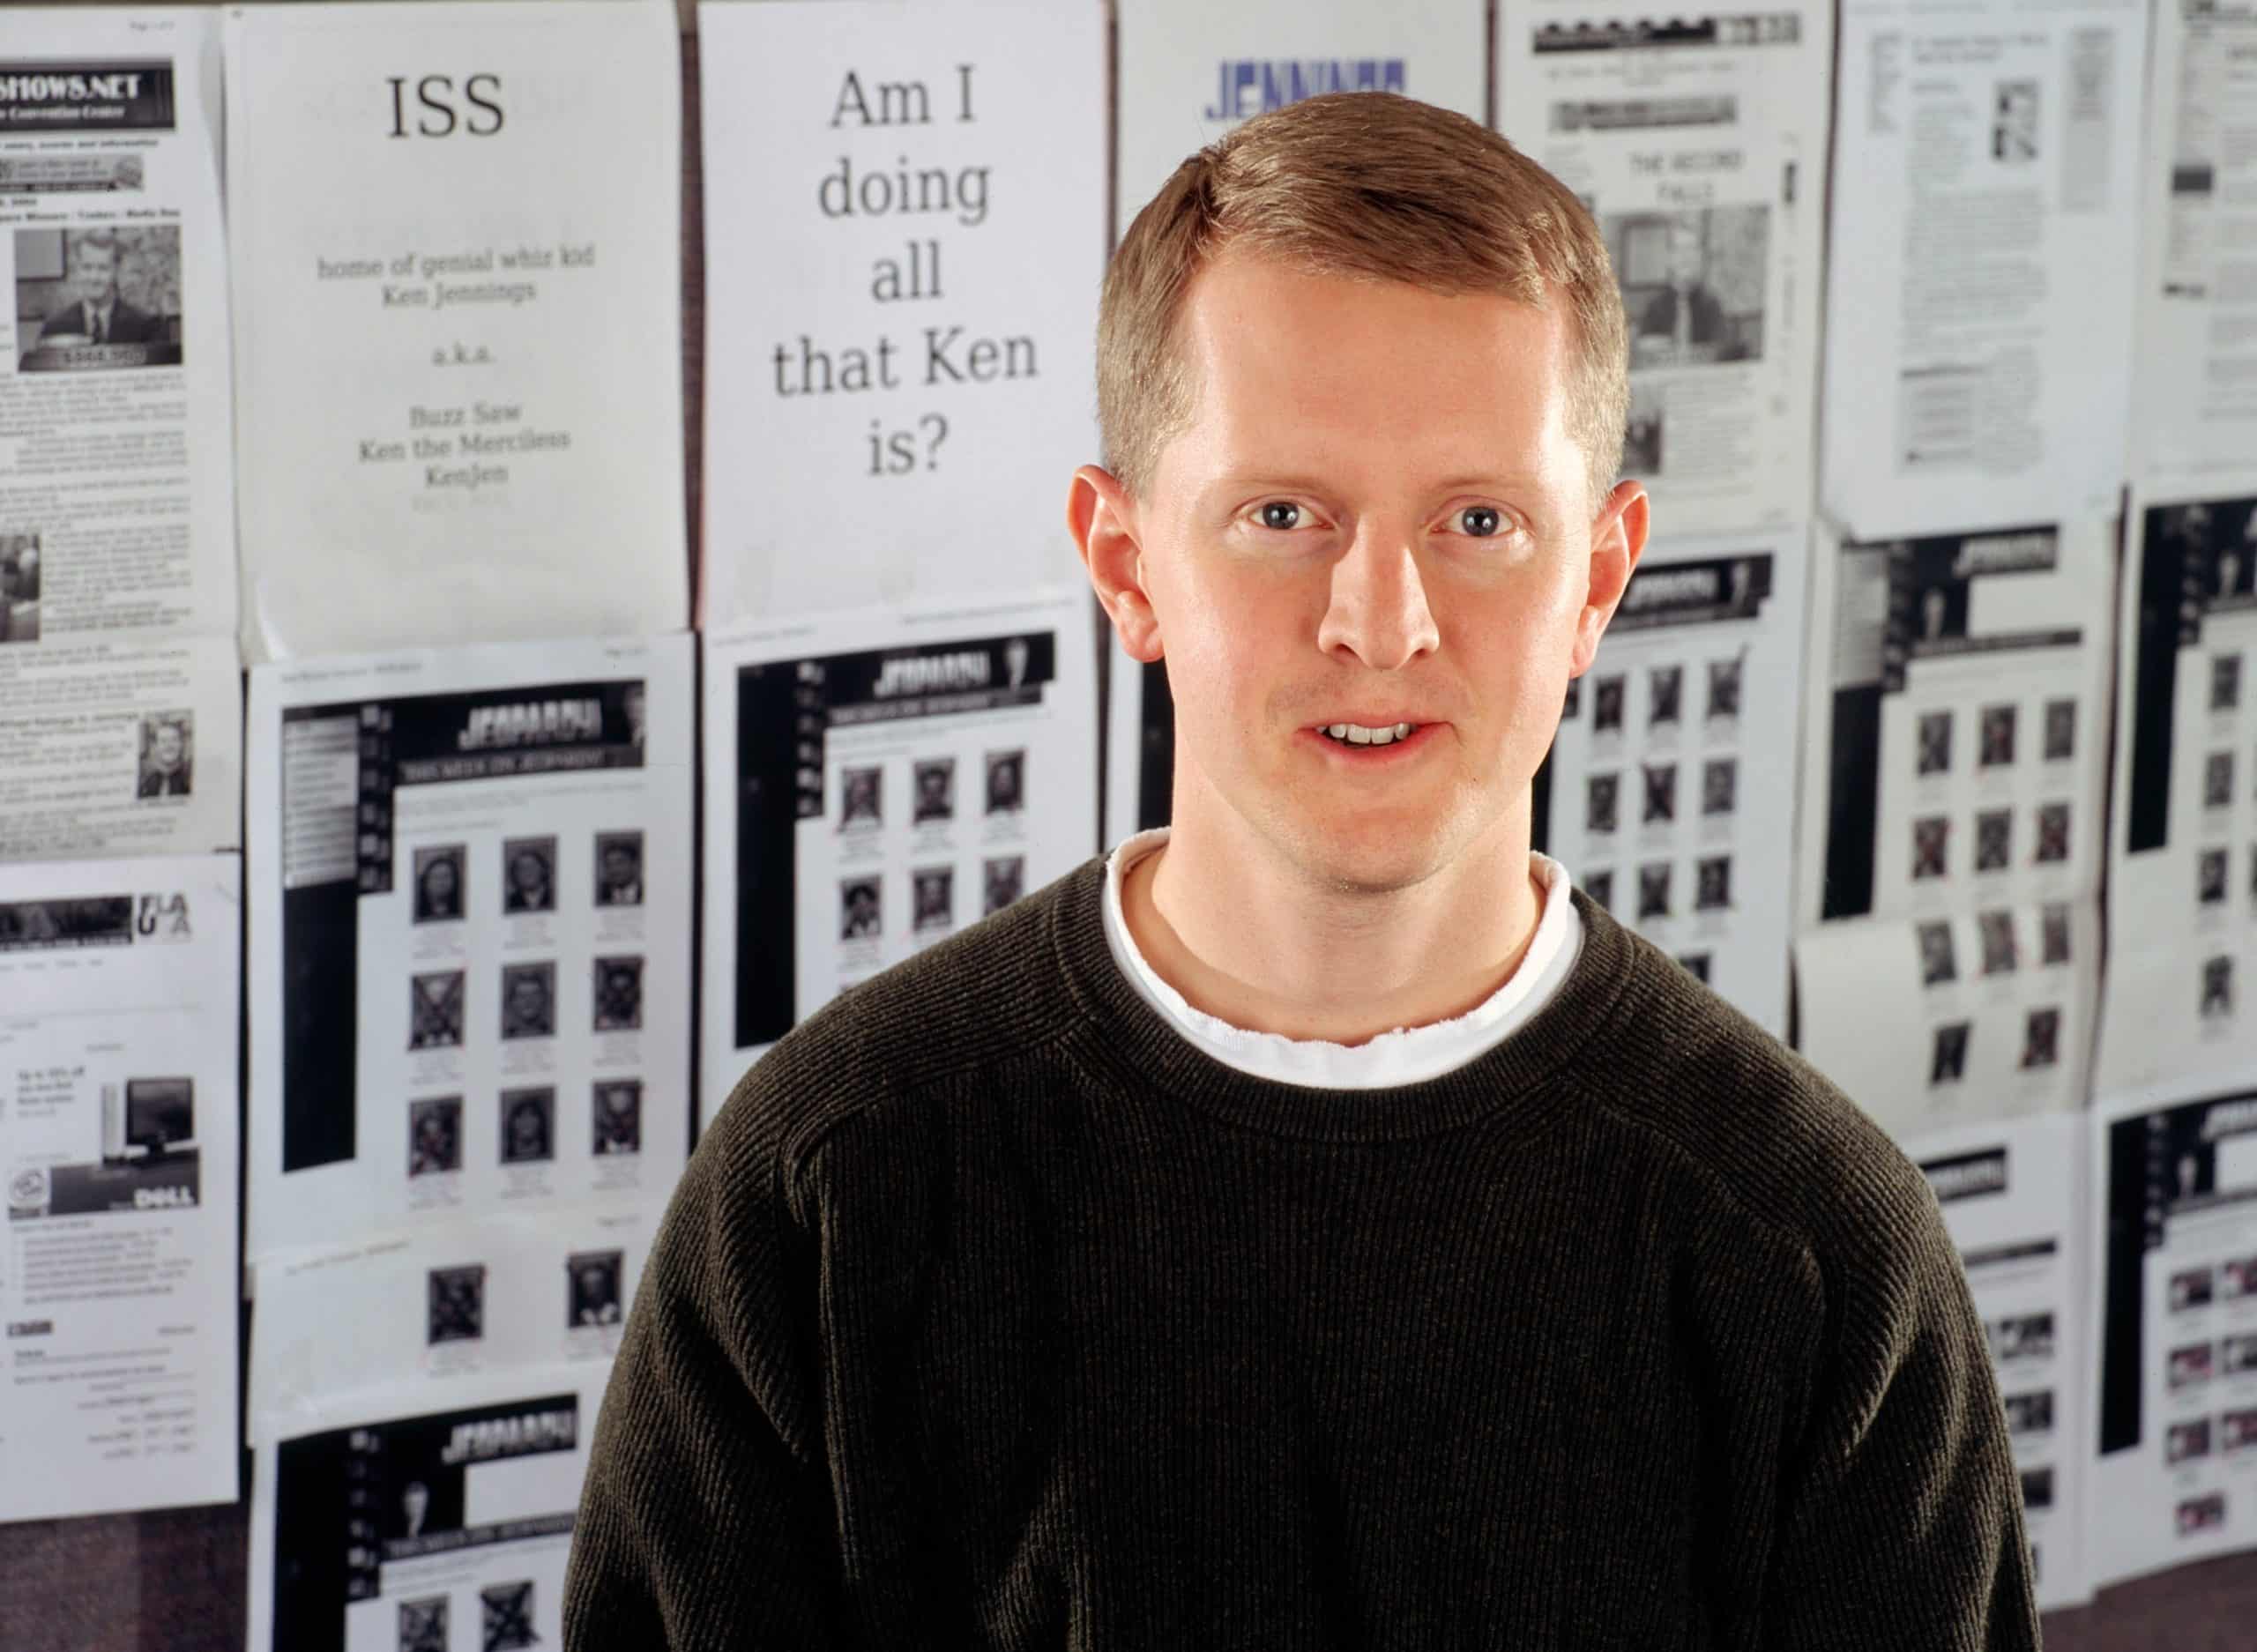 JEOPARDY! contestant and record-breaking winner Ken Jennings, who won 74 straight games and more than $2.5 million during his first run as a contestant on the show